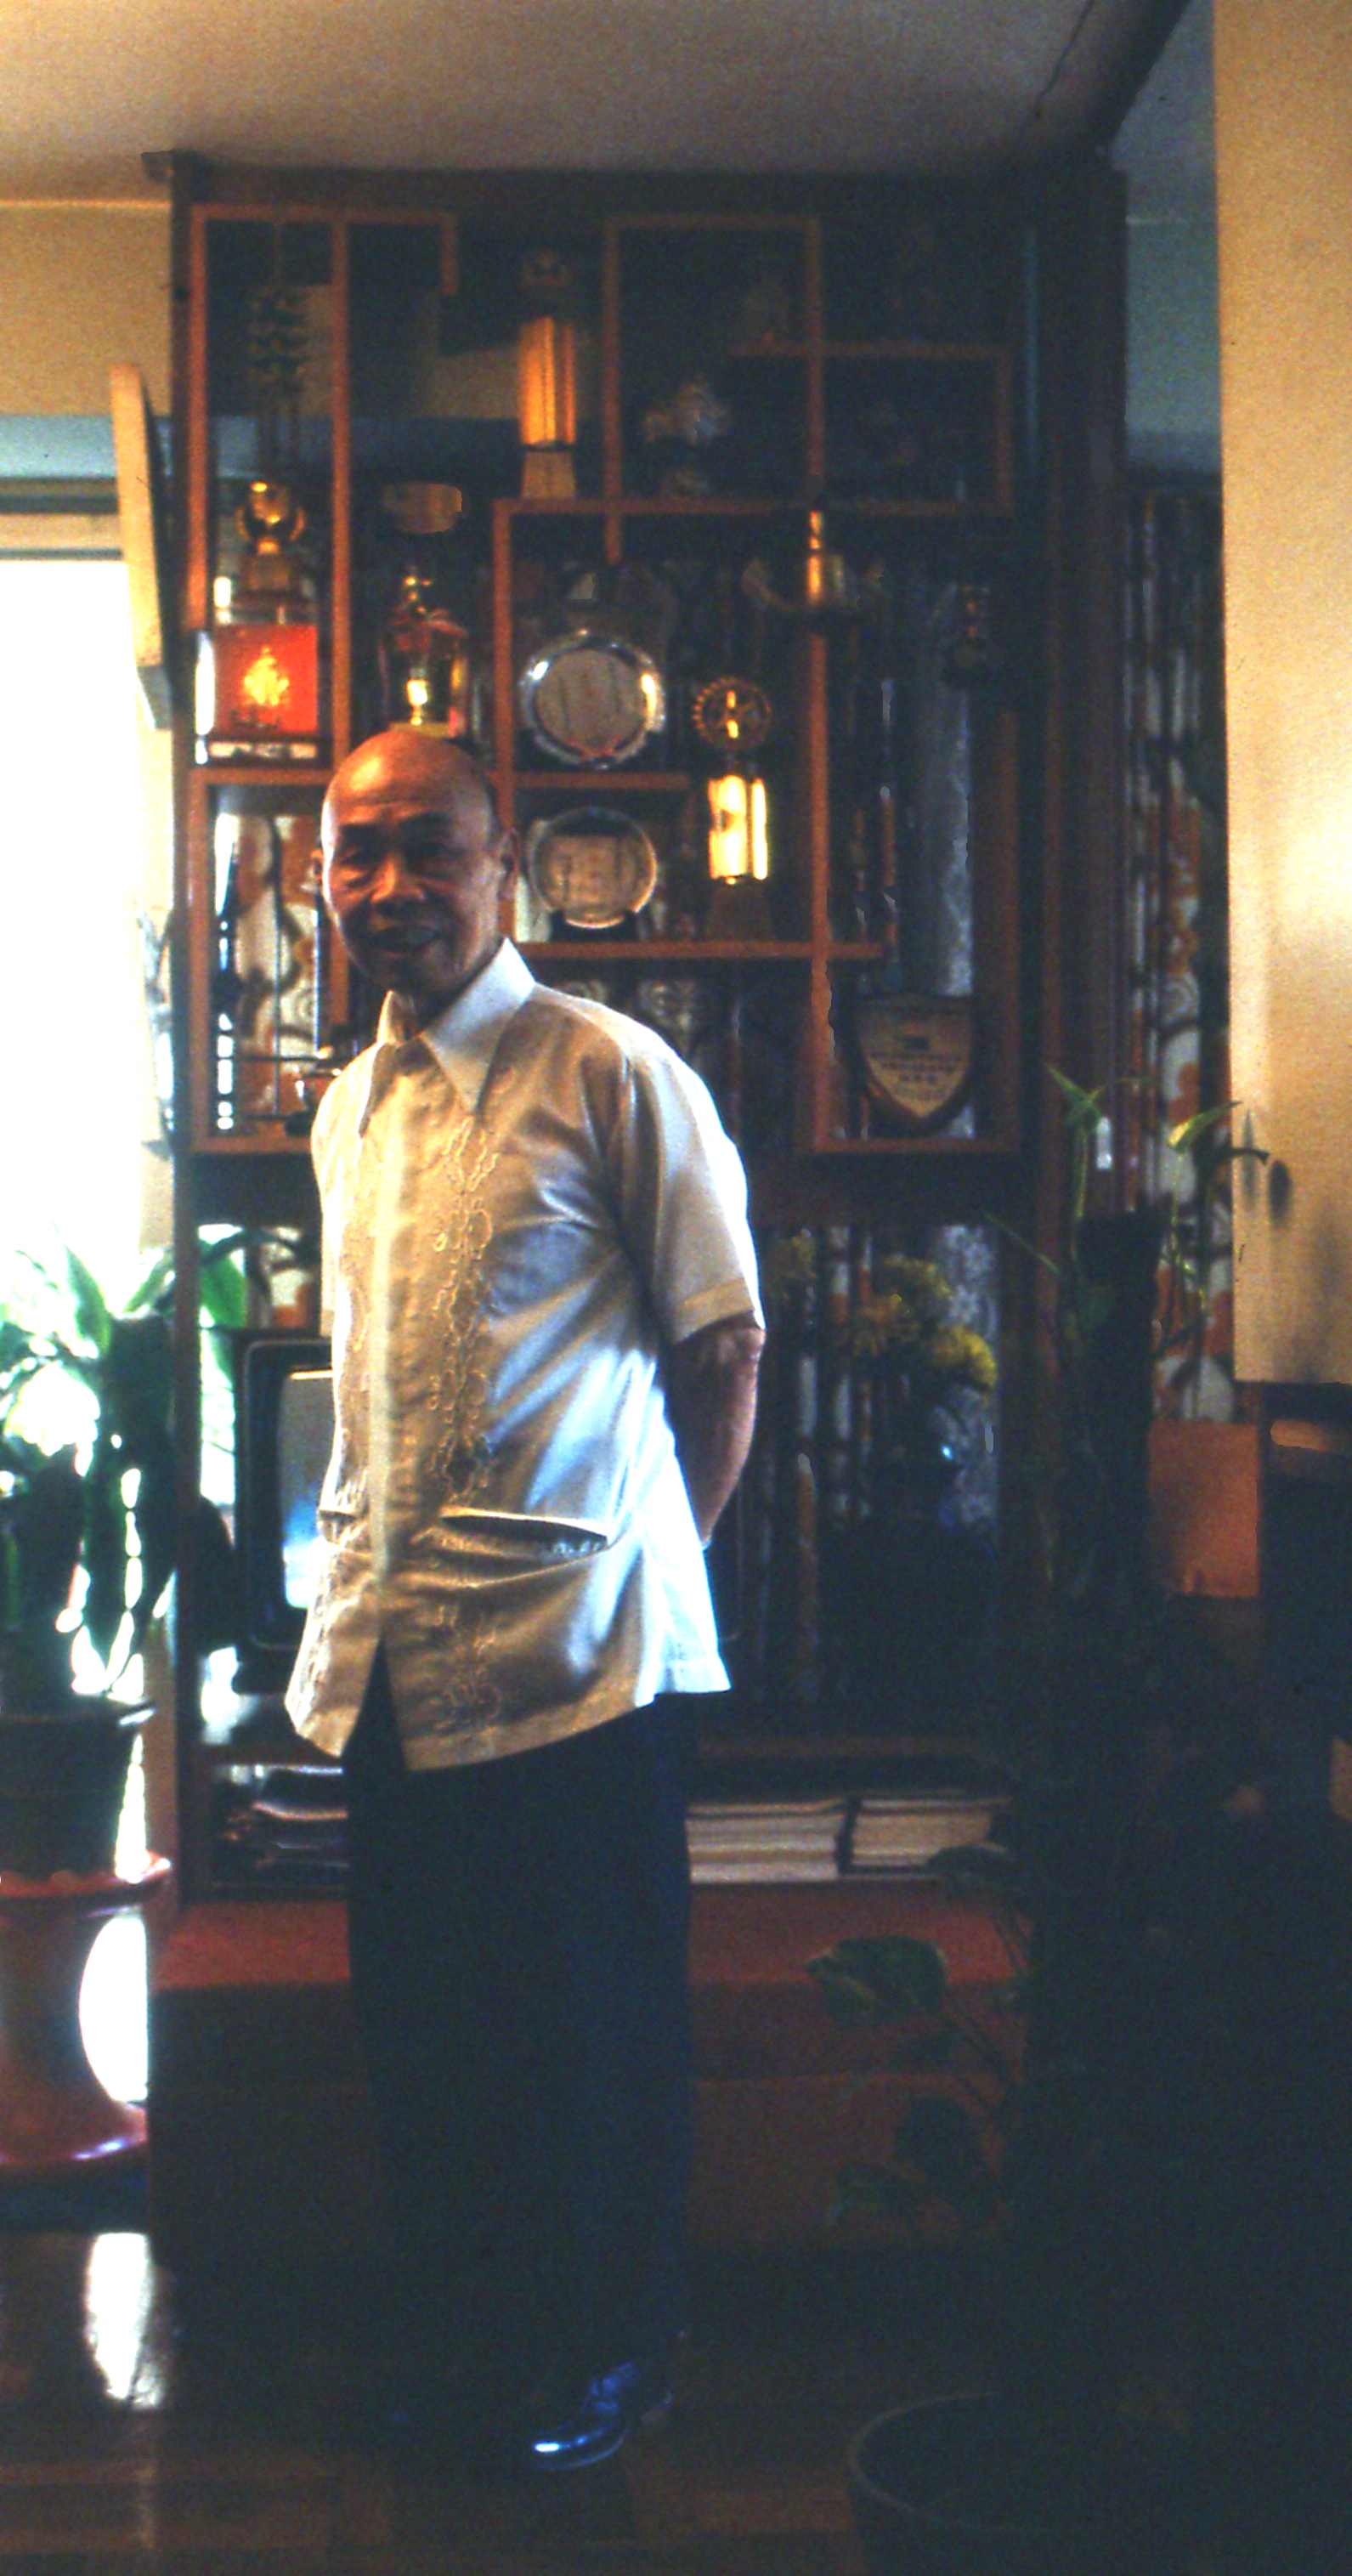 chan hon chung in his country house